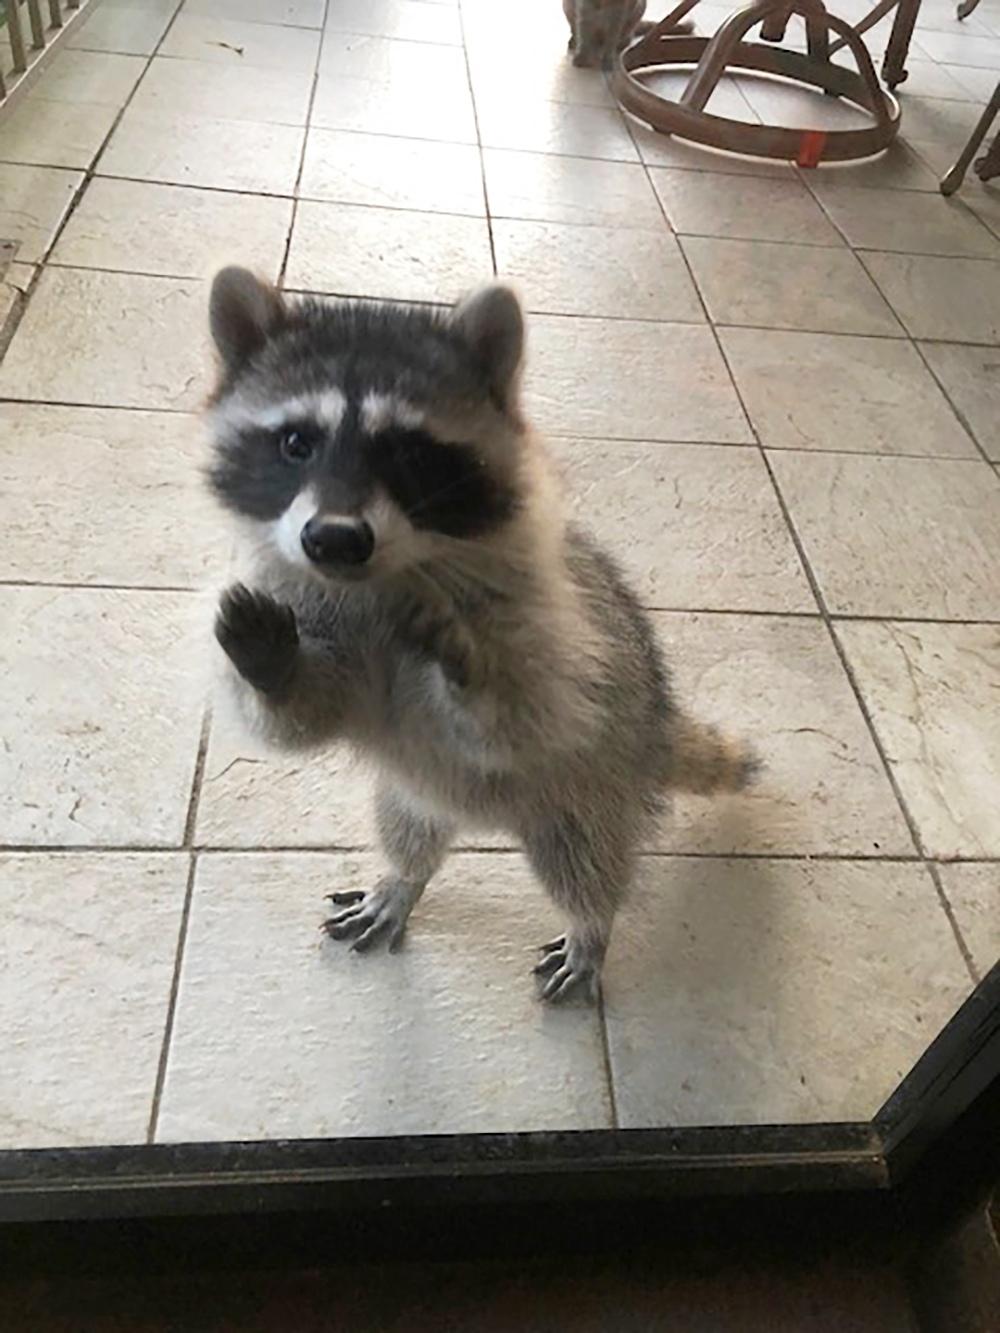 Close-up of a raccoon peering inside through a glass door, standing upright, showing its curiosity and engagement with the indoor environment.